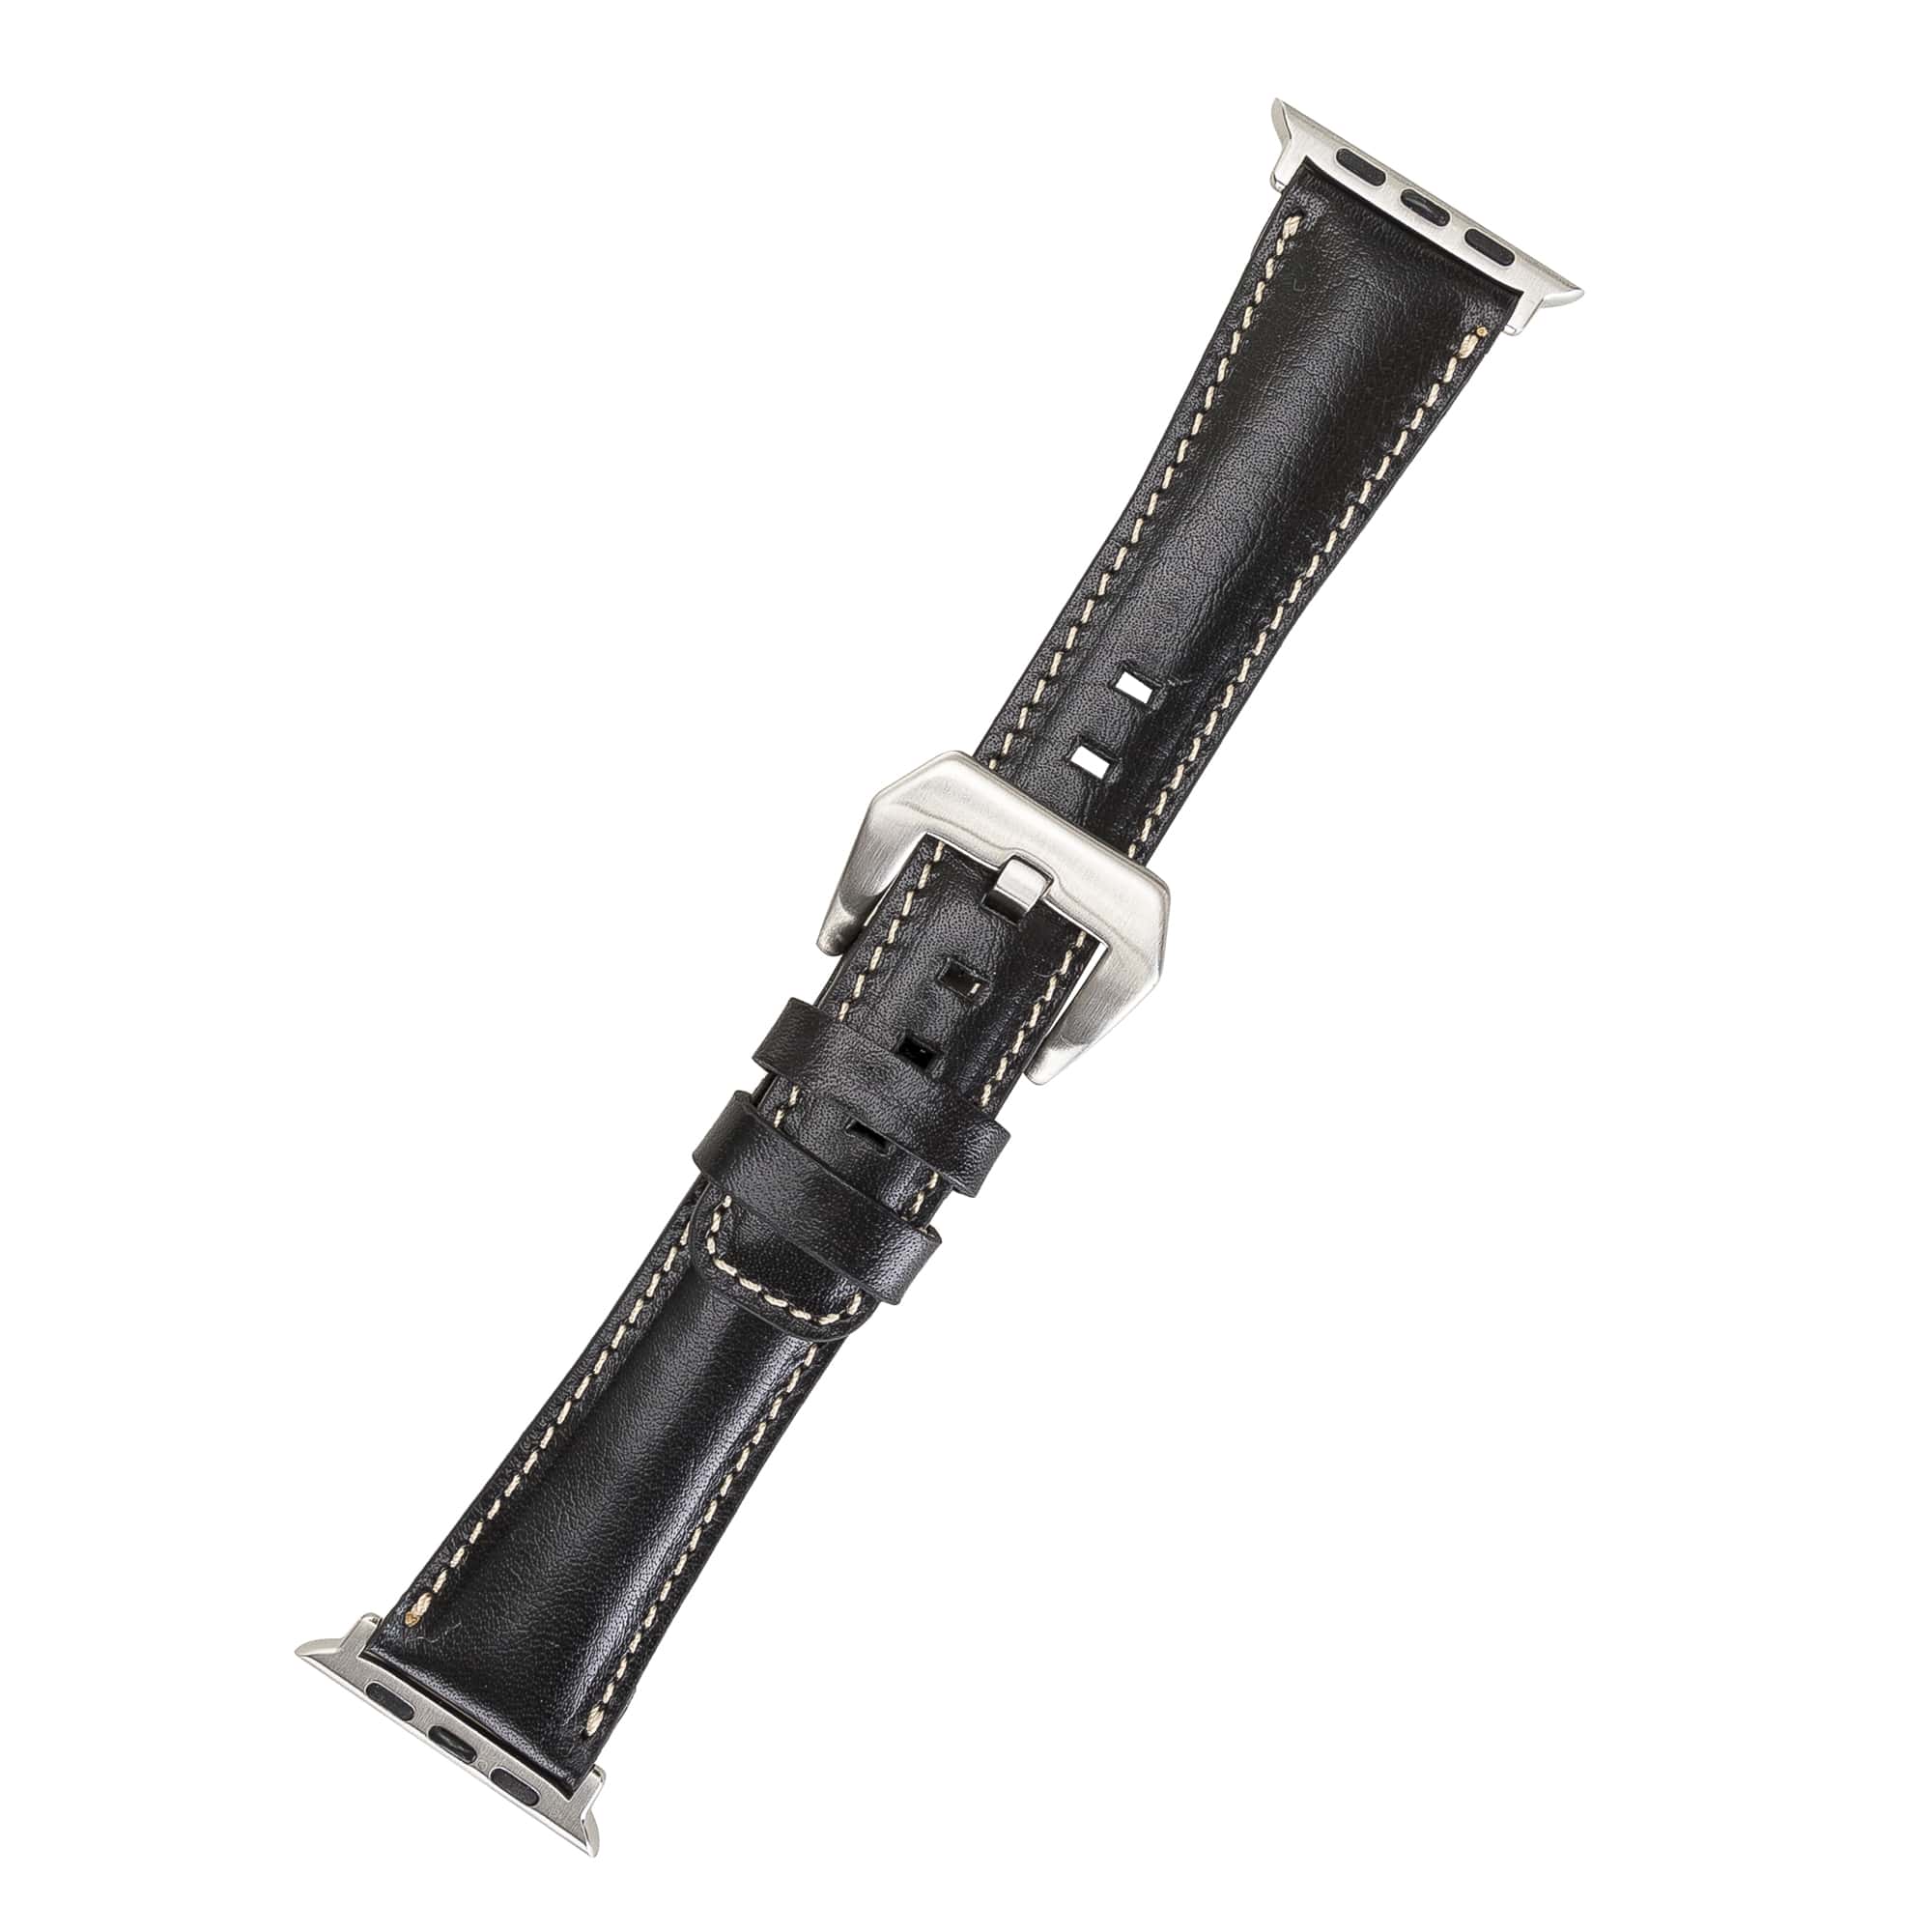 Harrow Black Genuine Leather Apple Watch Band Strap 38mm 40mm 42mm 44mm 45mm for All Series - Bomonti - 3